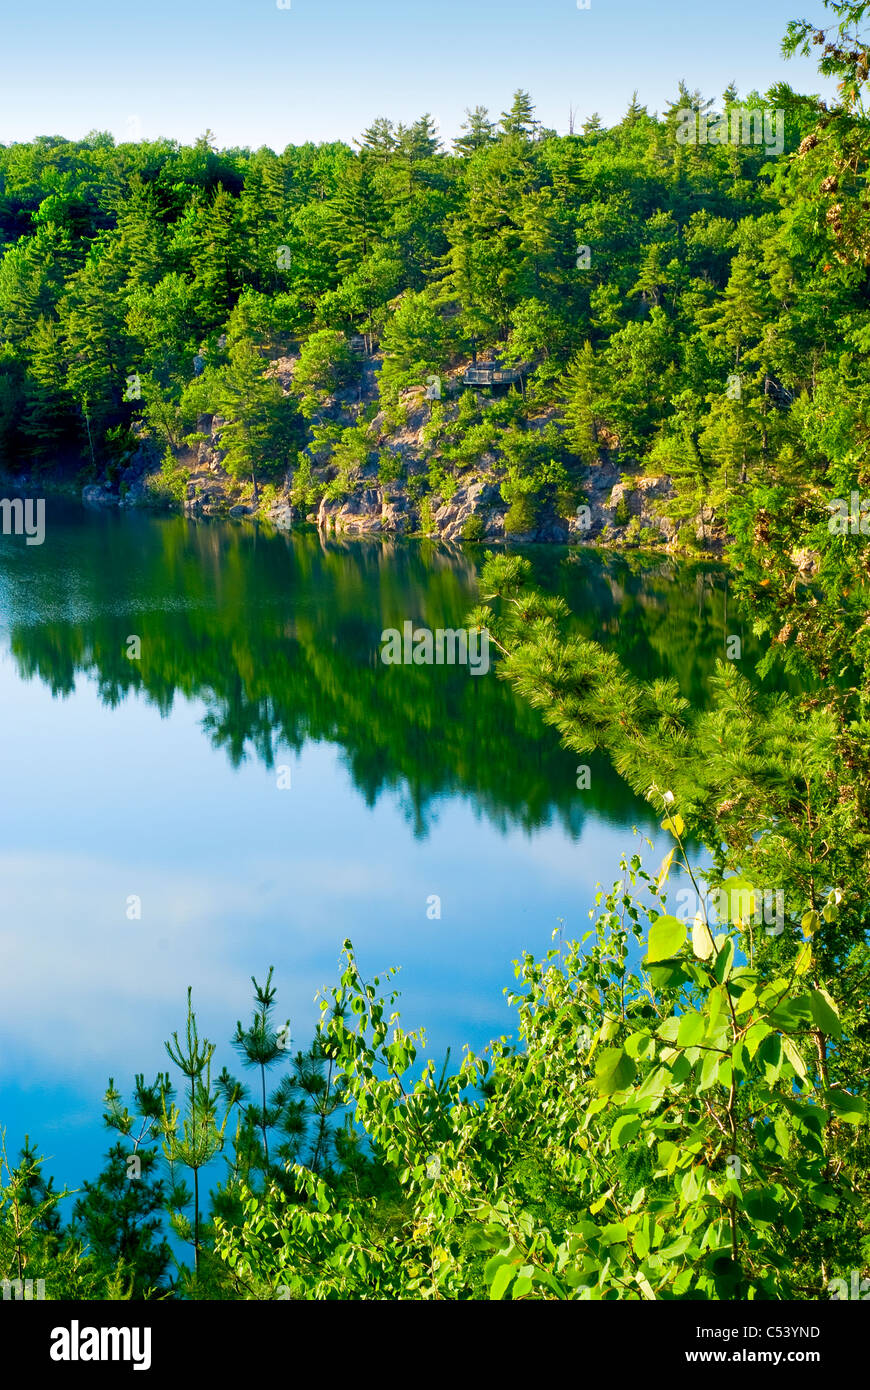 The blue waters of a very rare meromictic type of lake in Gatineau, Quebec, Canada. Stock Photo